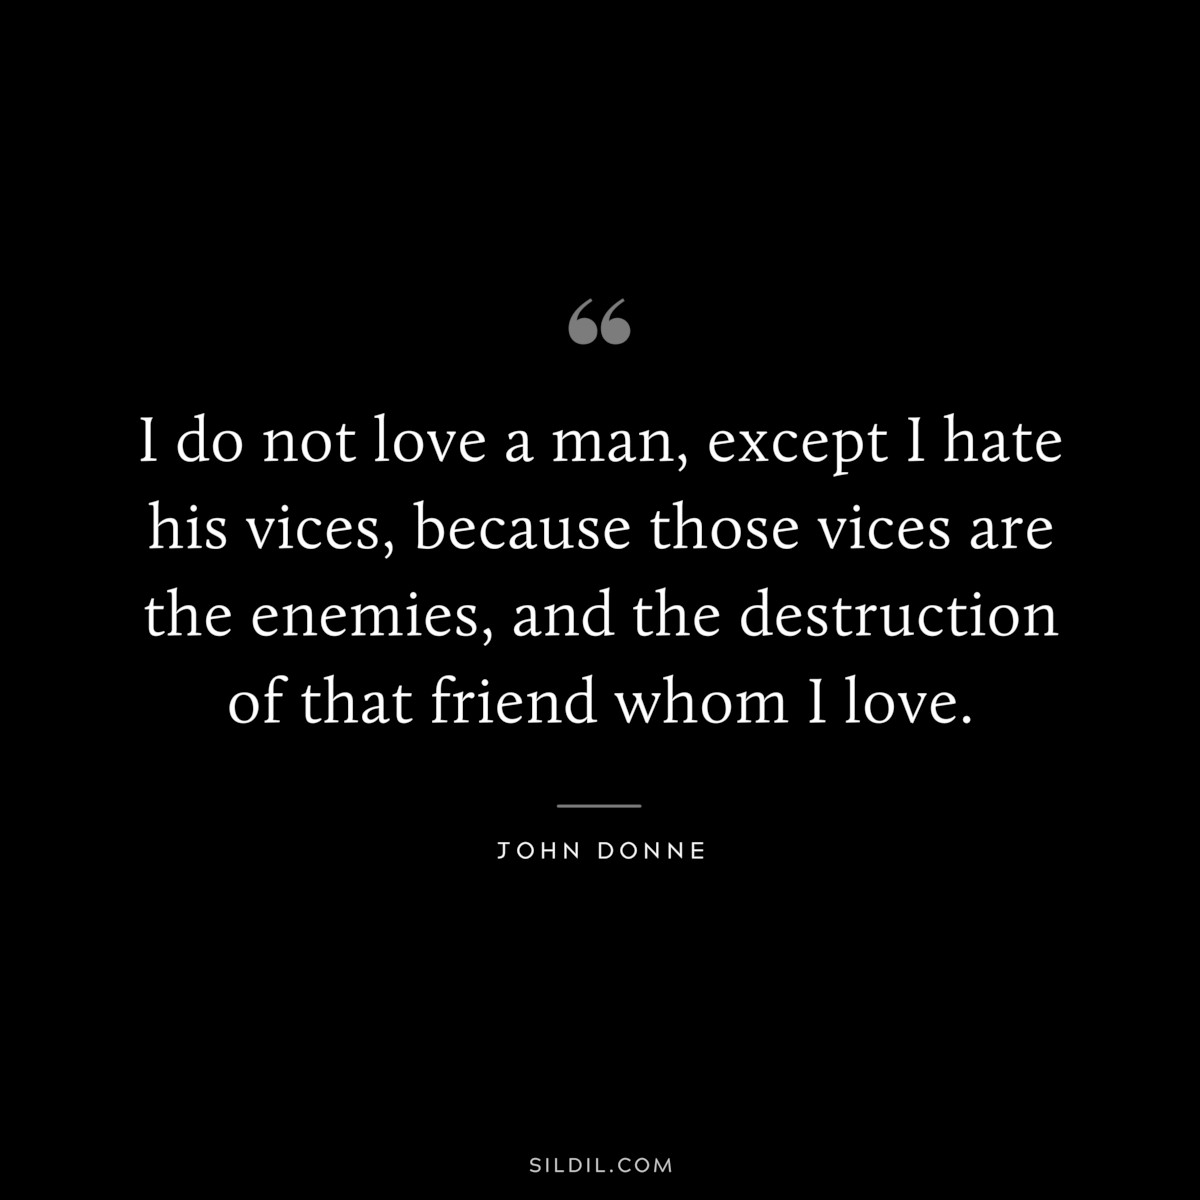 I do not love a man, except I hate his vices, because those vices are the enemies, and the destruction of that friend whom I love. ― John Donne